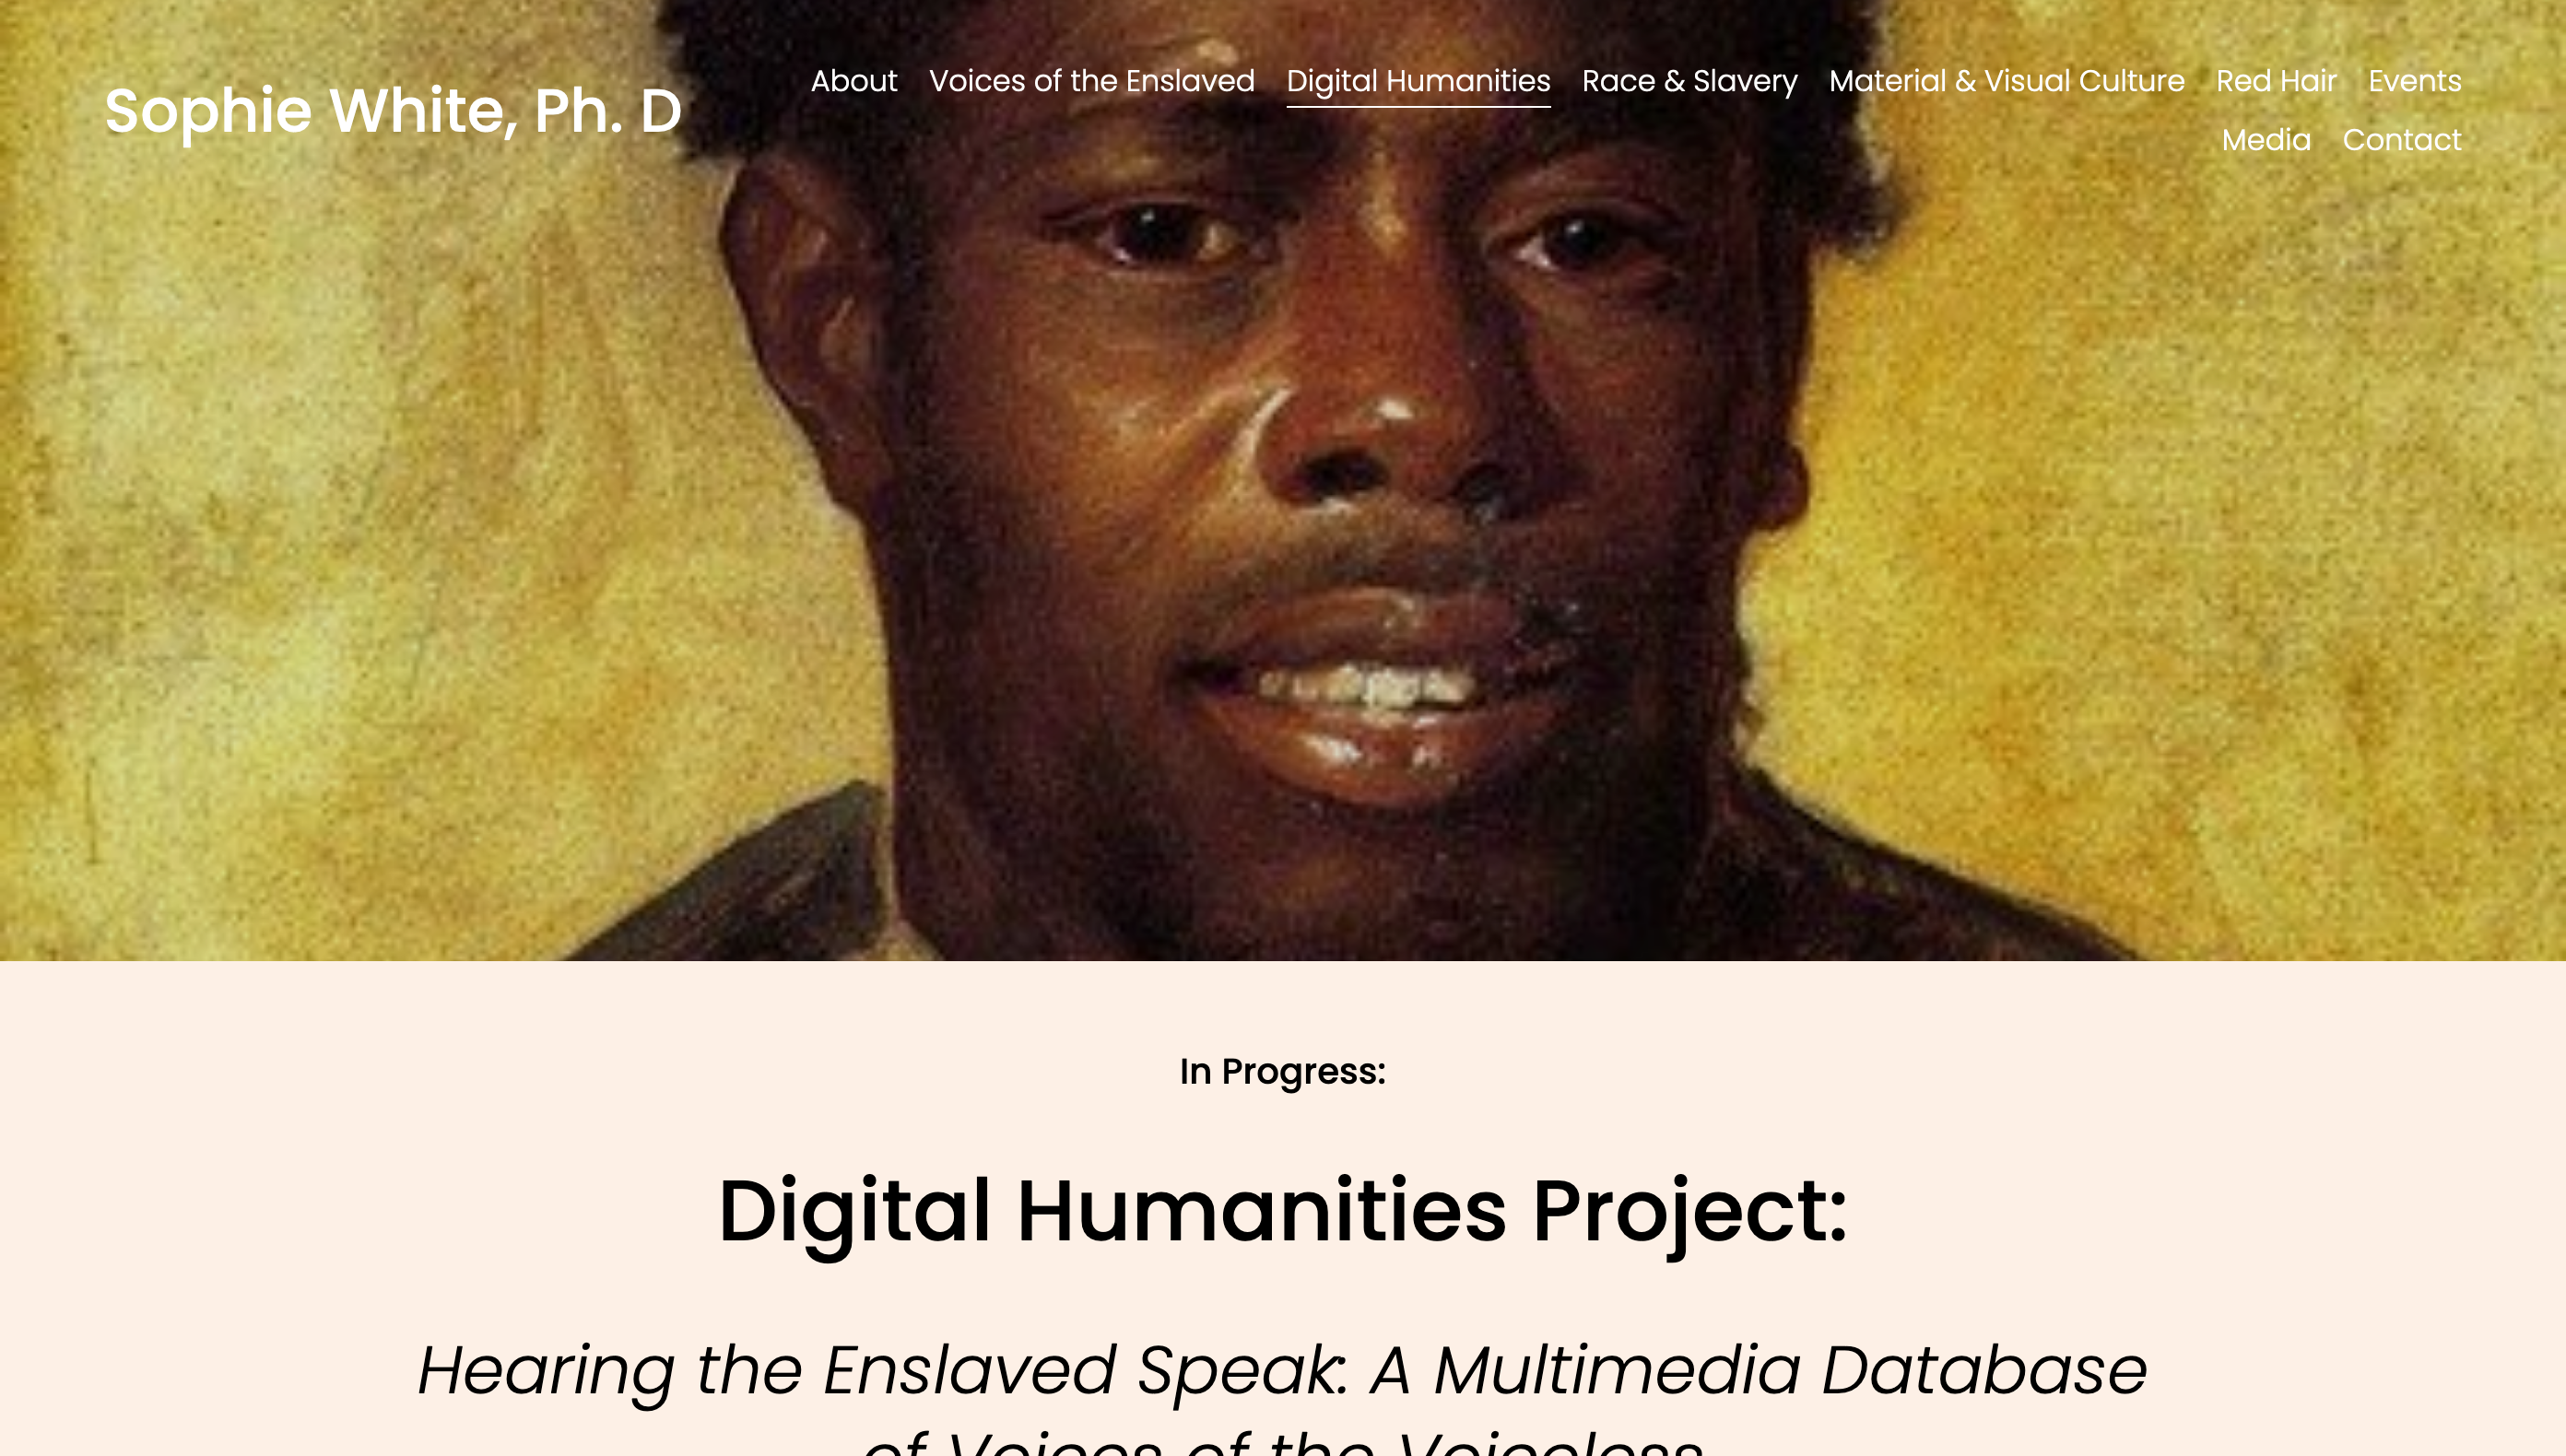 Hearing the Enslaved Speak : A Multimedia Database of Voices of the Voiceless